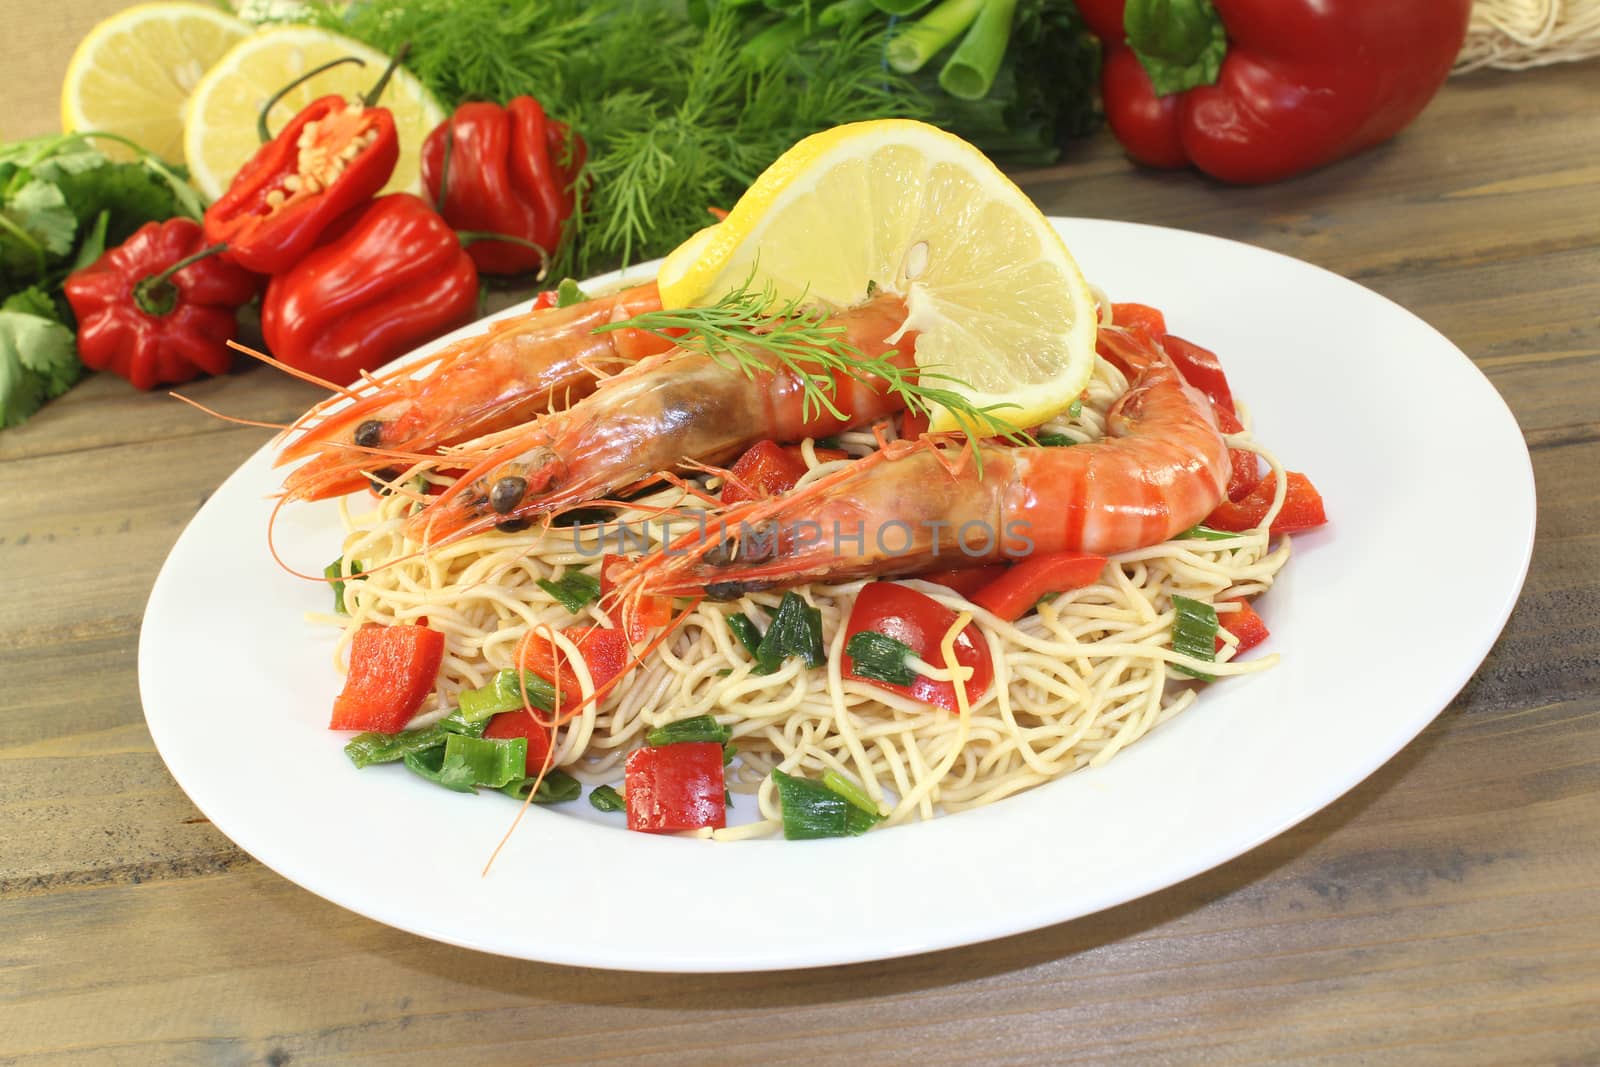 Prawns with Mie noodles with vegetables and lemon